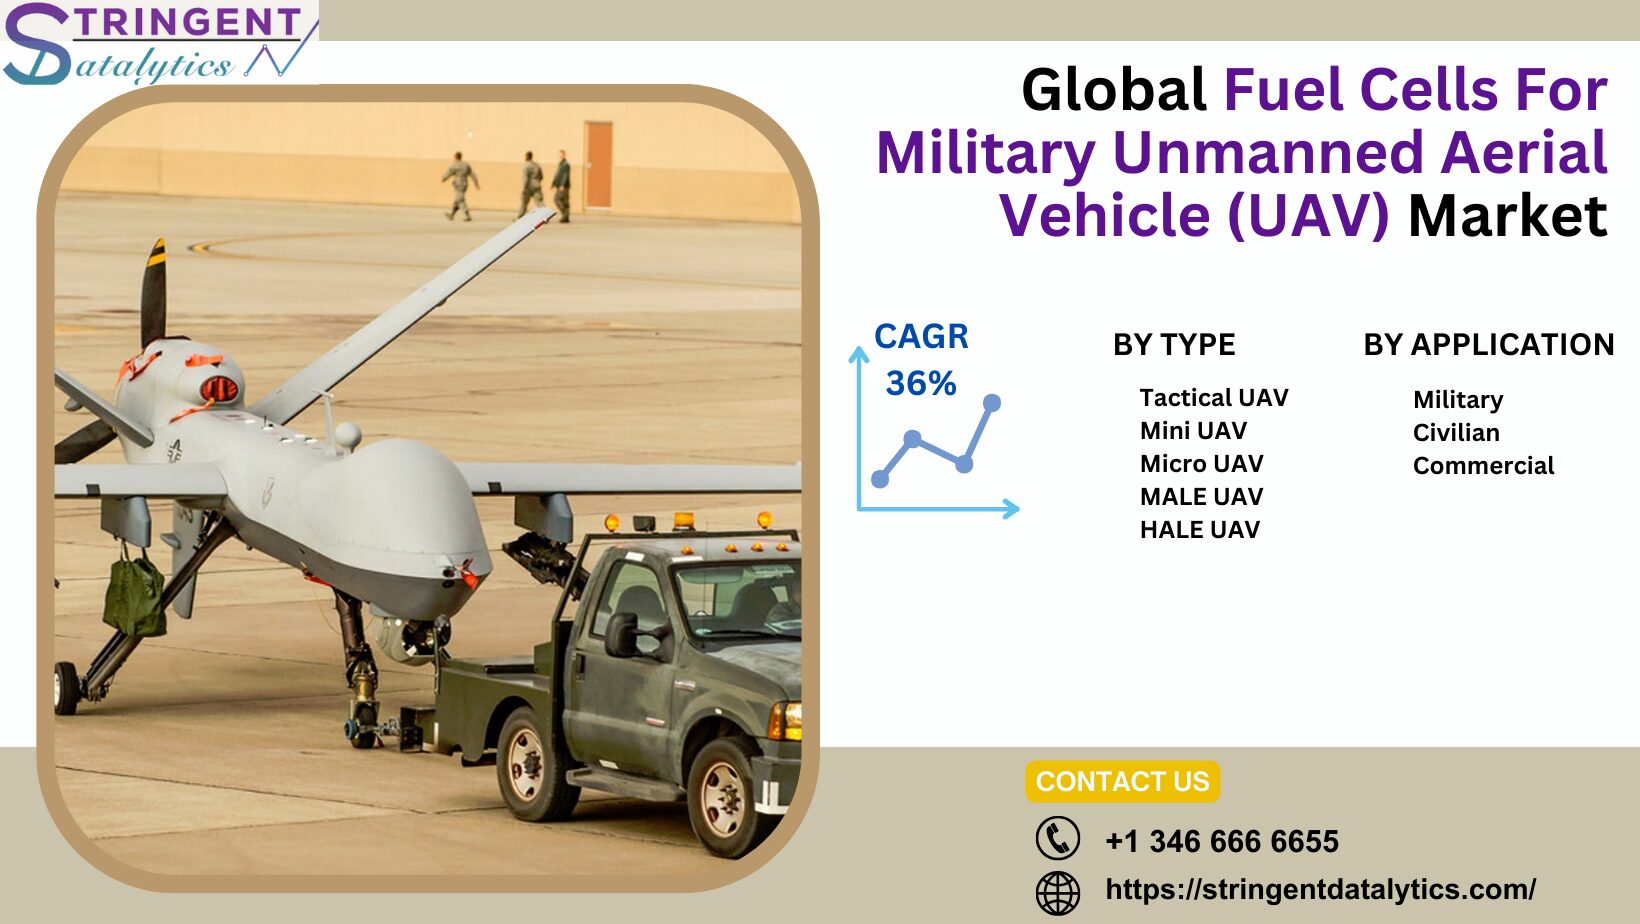 Fuel Cells for Military Unmanned Aerial Vehicle (UAV) Market